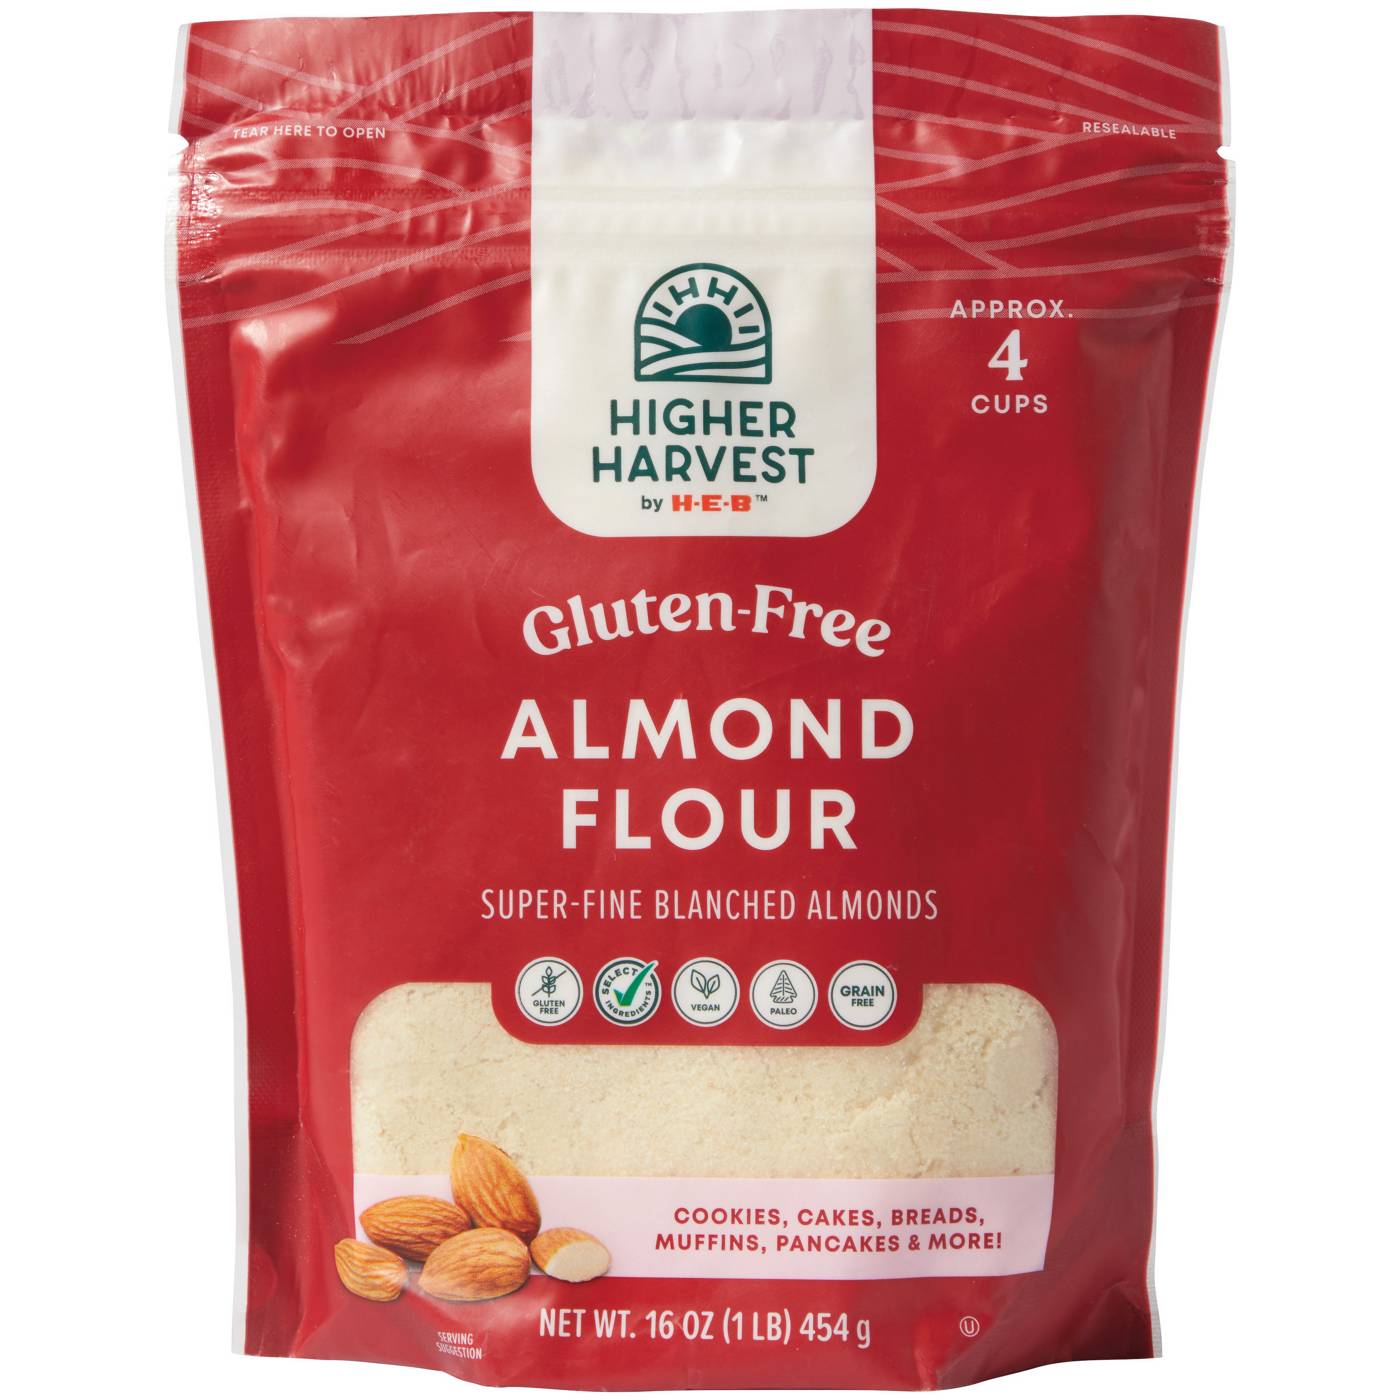 Higher Harvest by H-E-B Gluten-Free Almond Flour; image 1 of 2